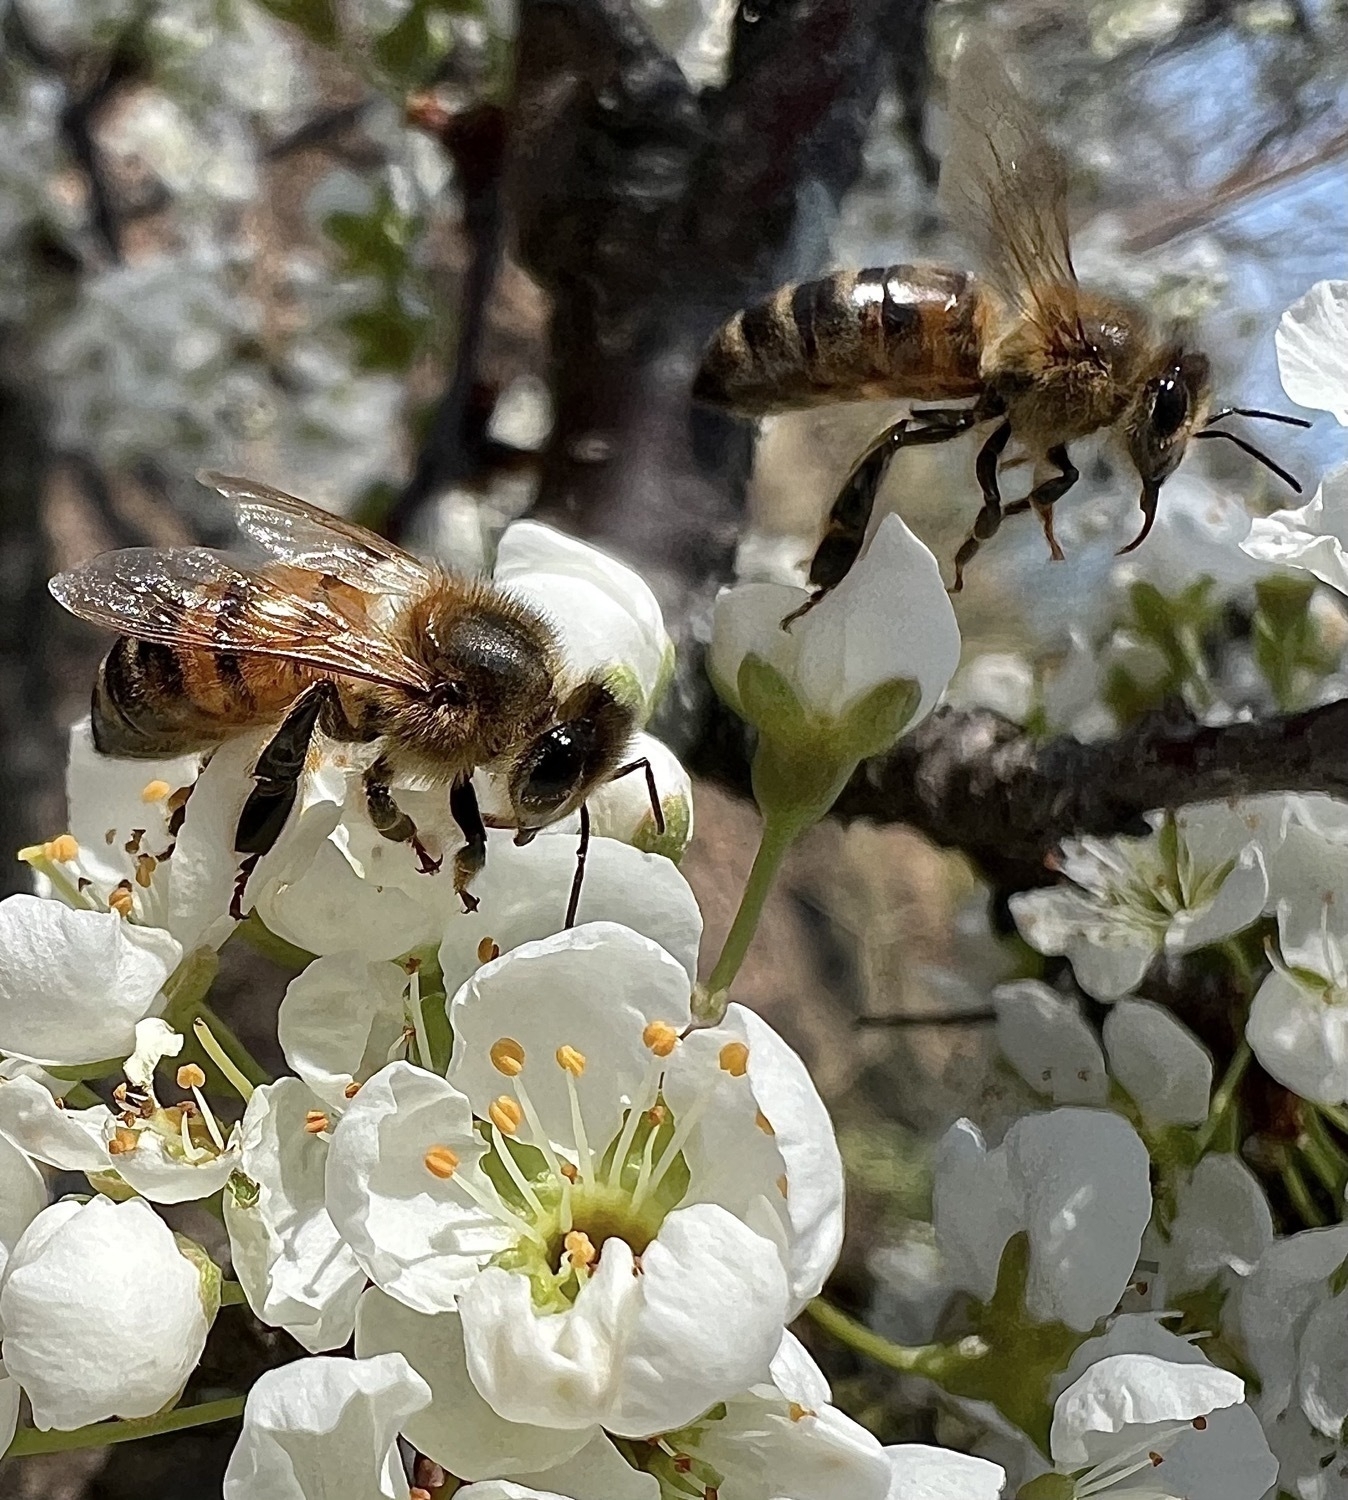 A closeup of two honeybees, one is flying above white flowers, the other is resting on a flower as it collects pollen